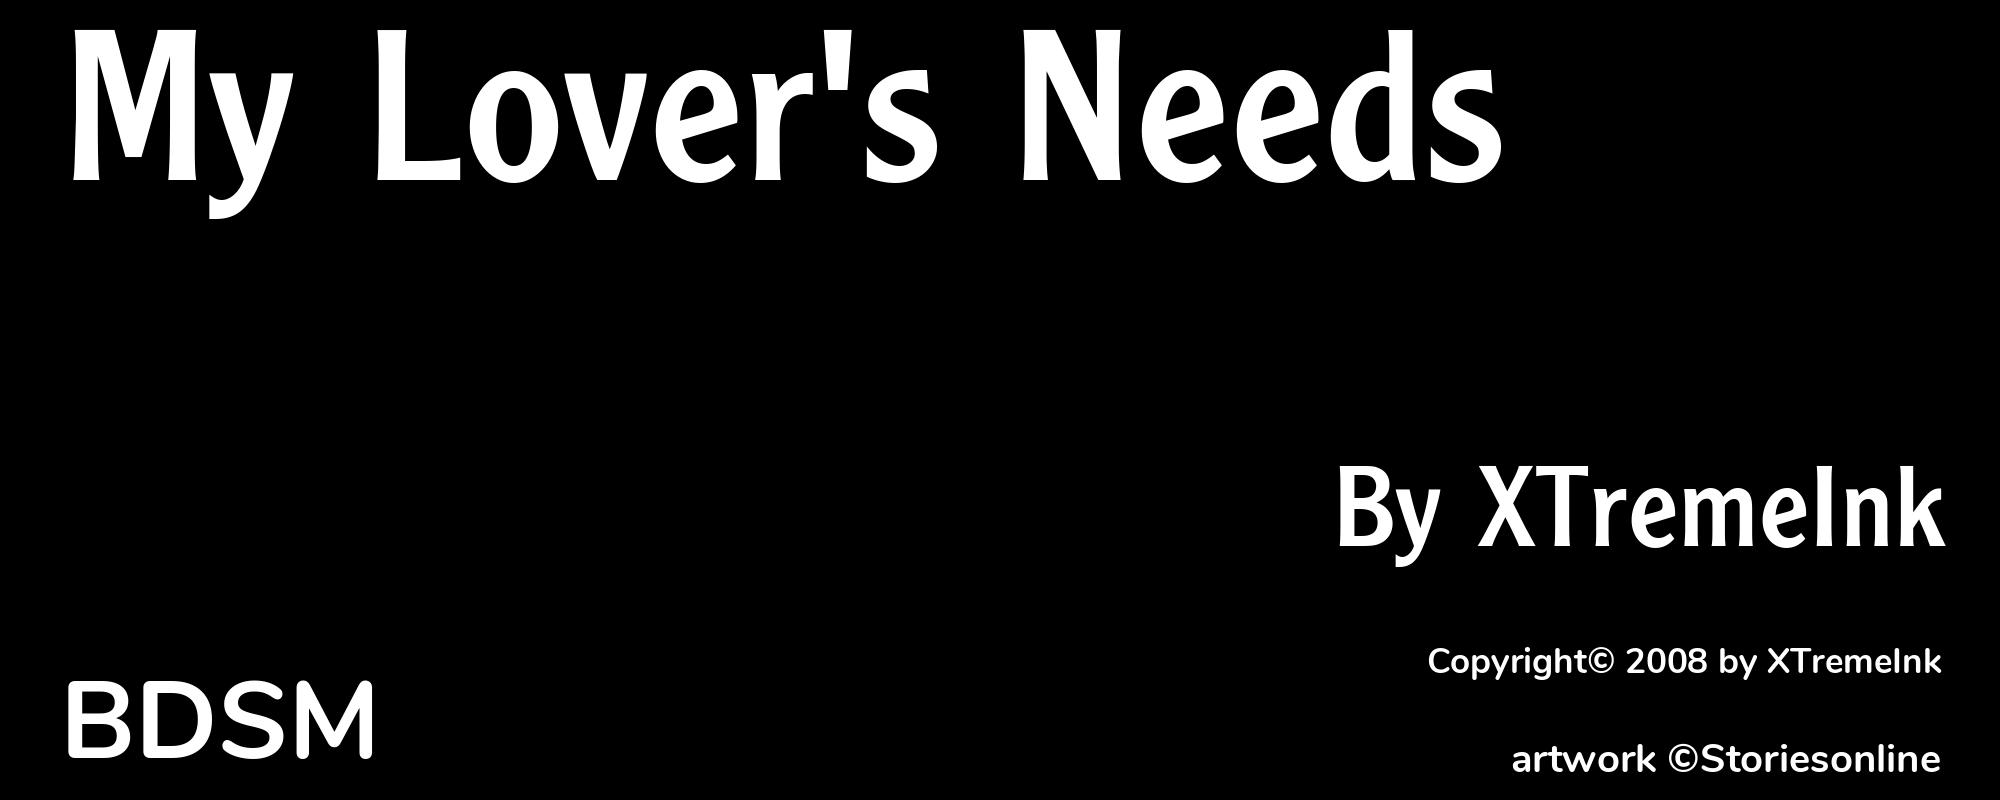 My Lover's Needs - Cover